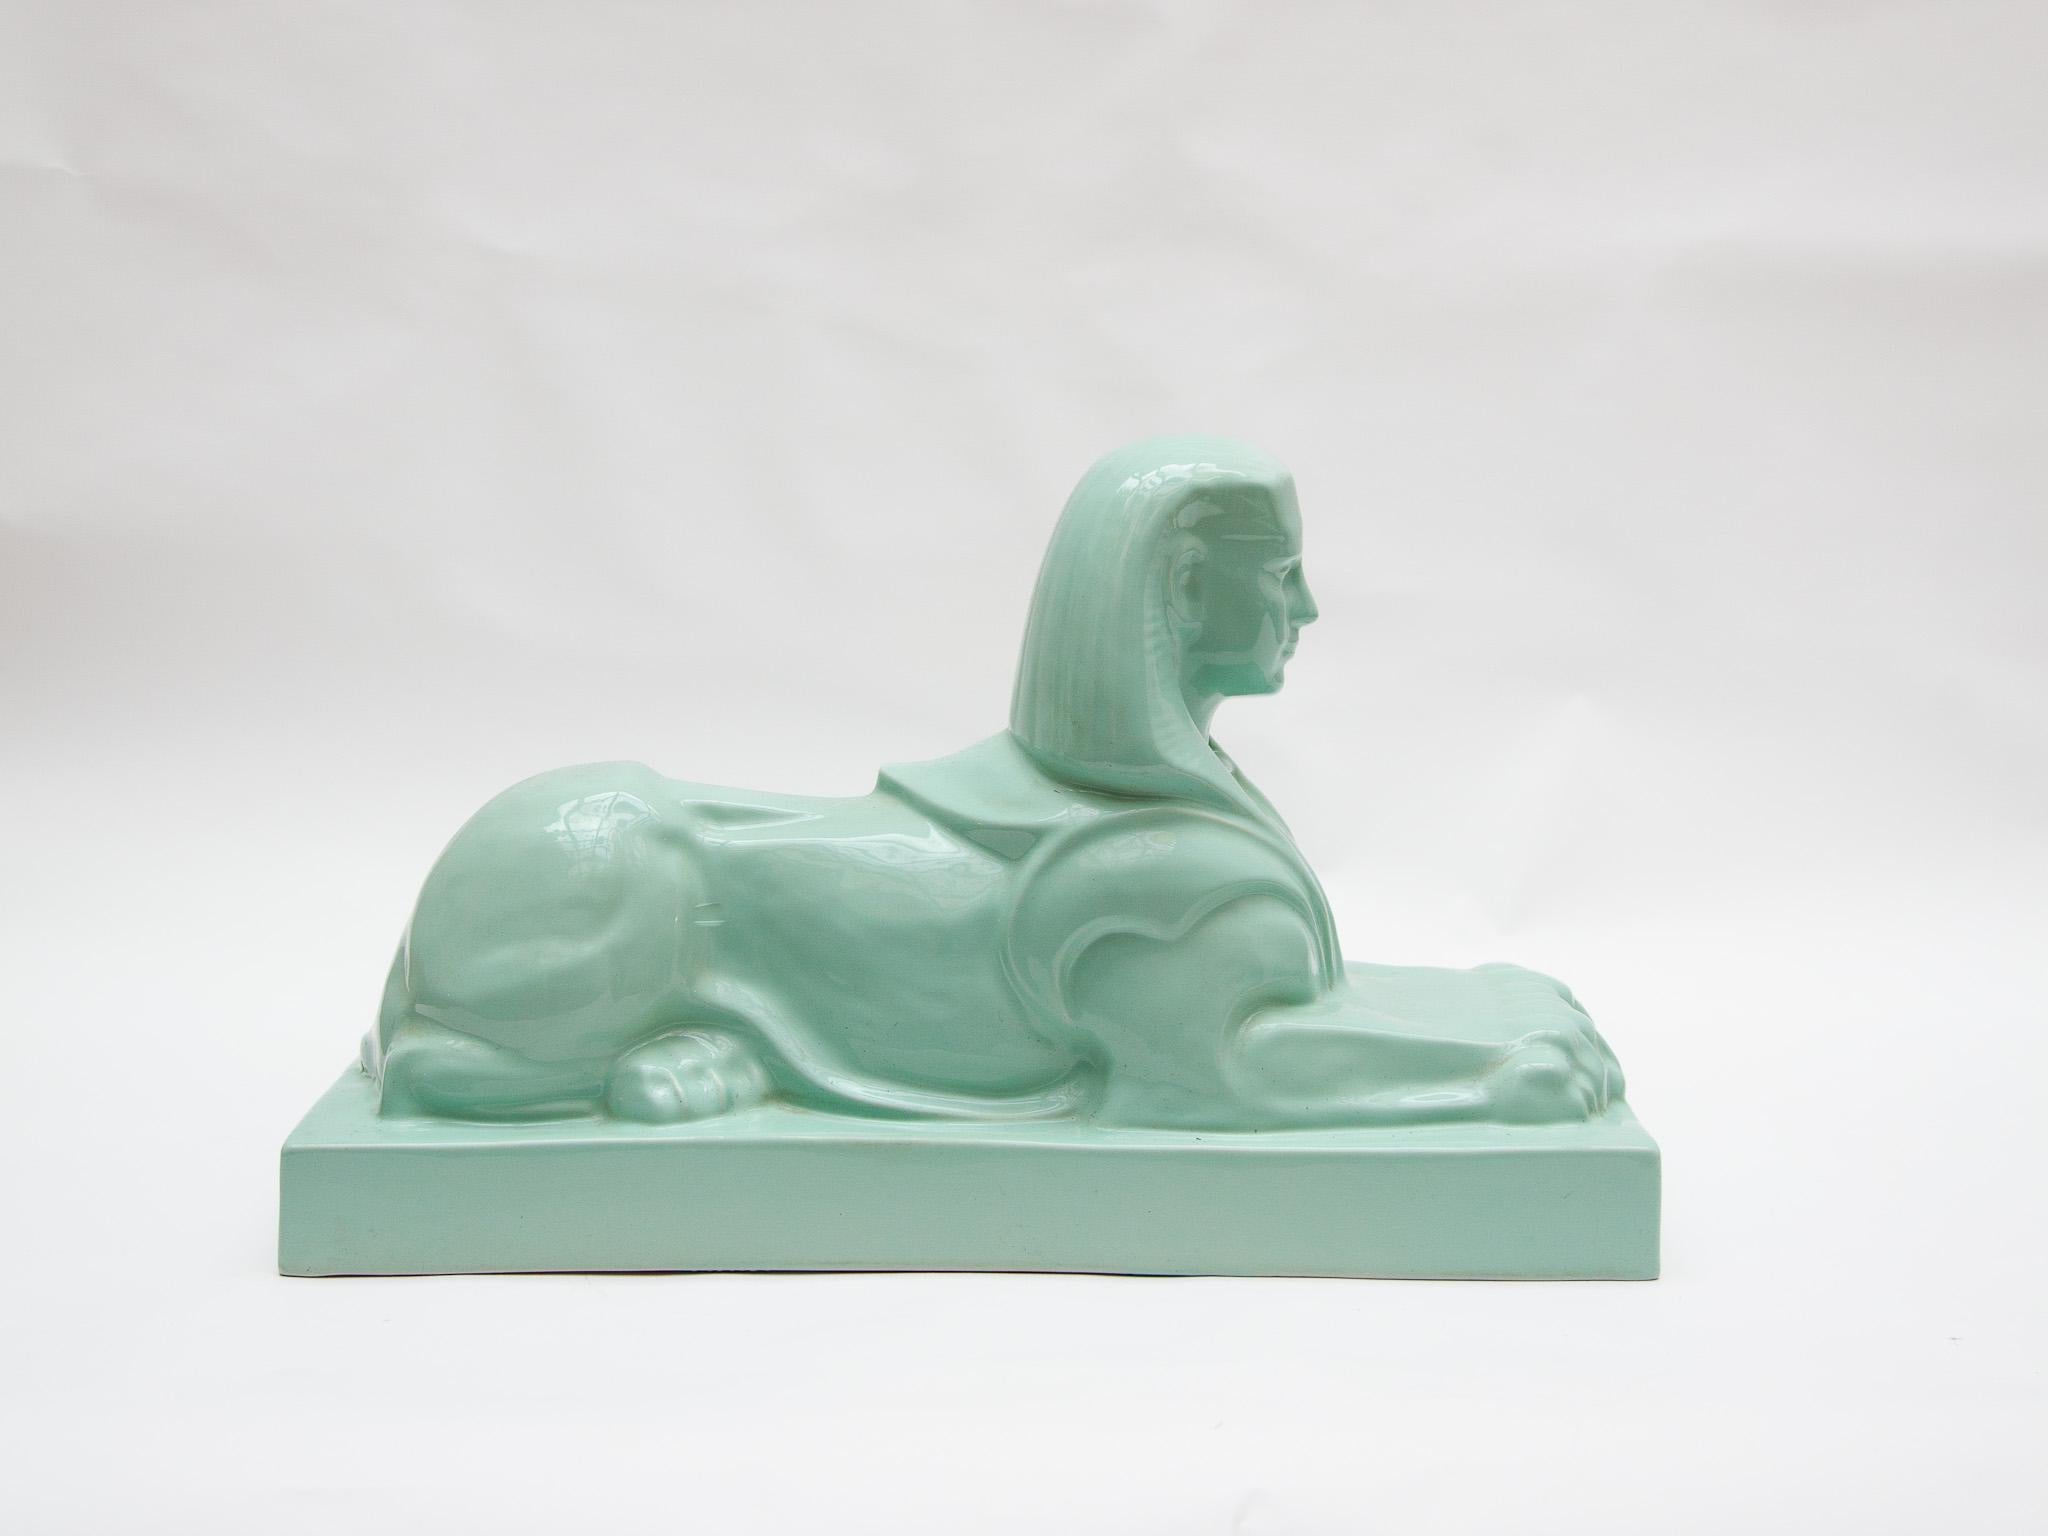 A particularly beautiful glazed earthenware Sphinx statue made by De Sphinx N.V. in Maastricht (Petrus Regout) and designed by the famous sculptor Charles Vos (1888-1954) Maastricht.
Depicted is a beautiful sphinx, standing guard, lying on a dais.